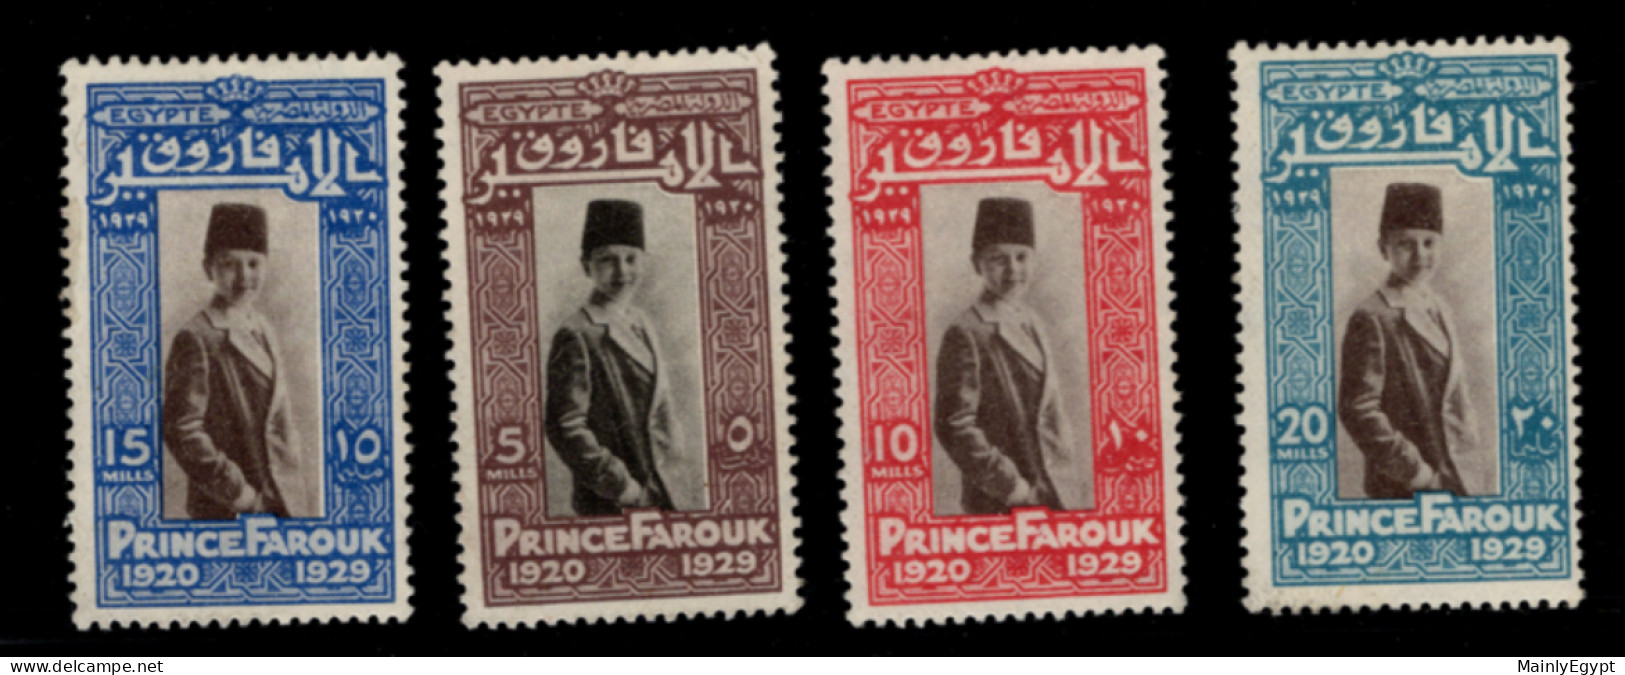 EGYPT: 1929, Birthday Prince Farouk, Brown Center, Mint  - 2000 Sets Exist (JMS02) - Unused Stamps